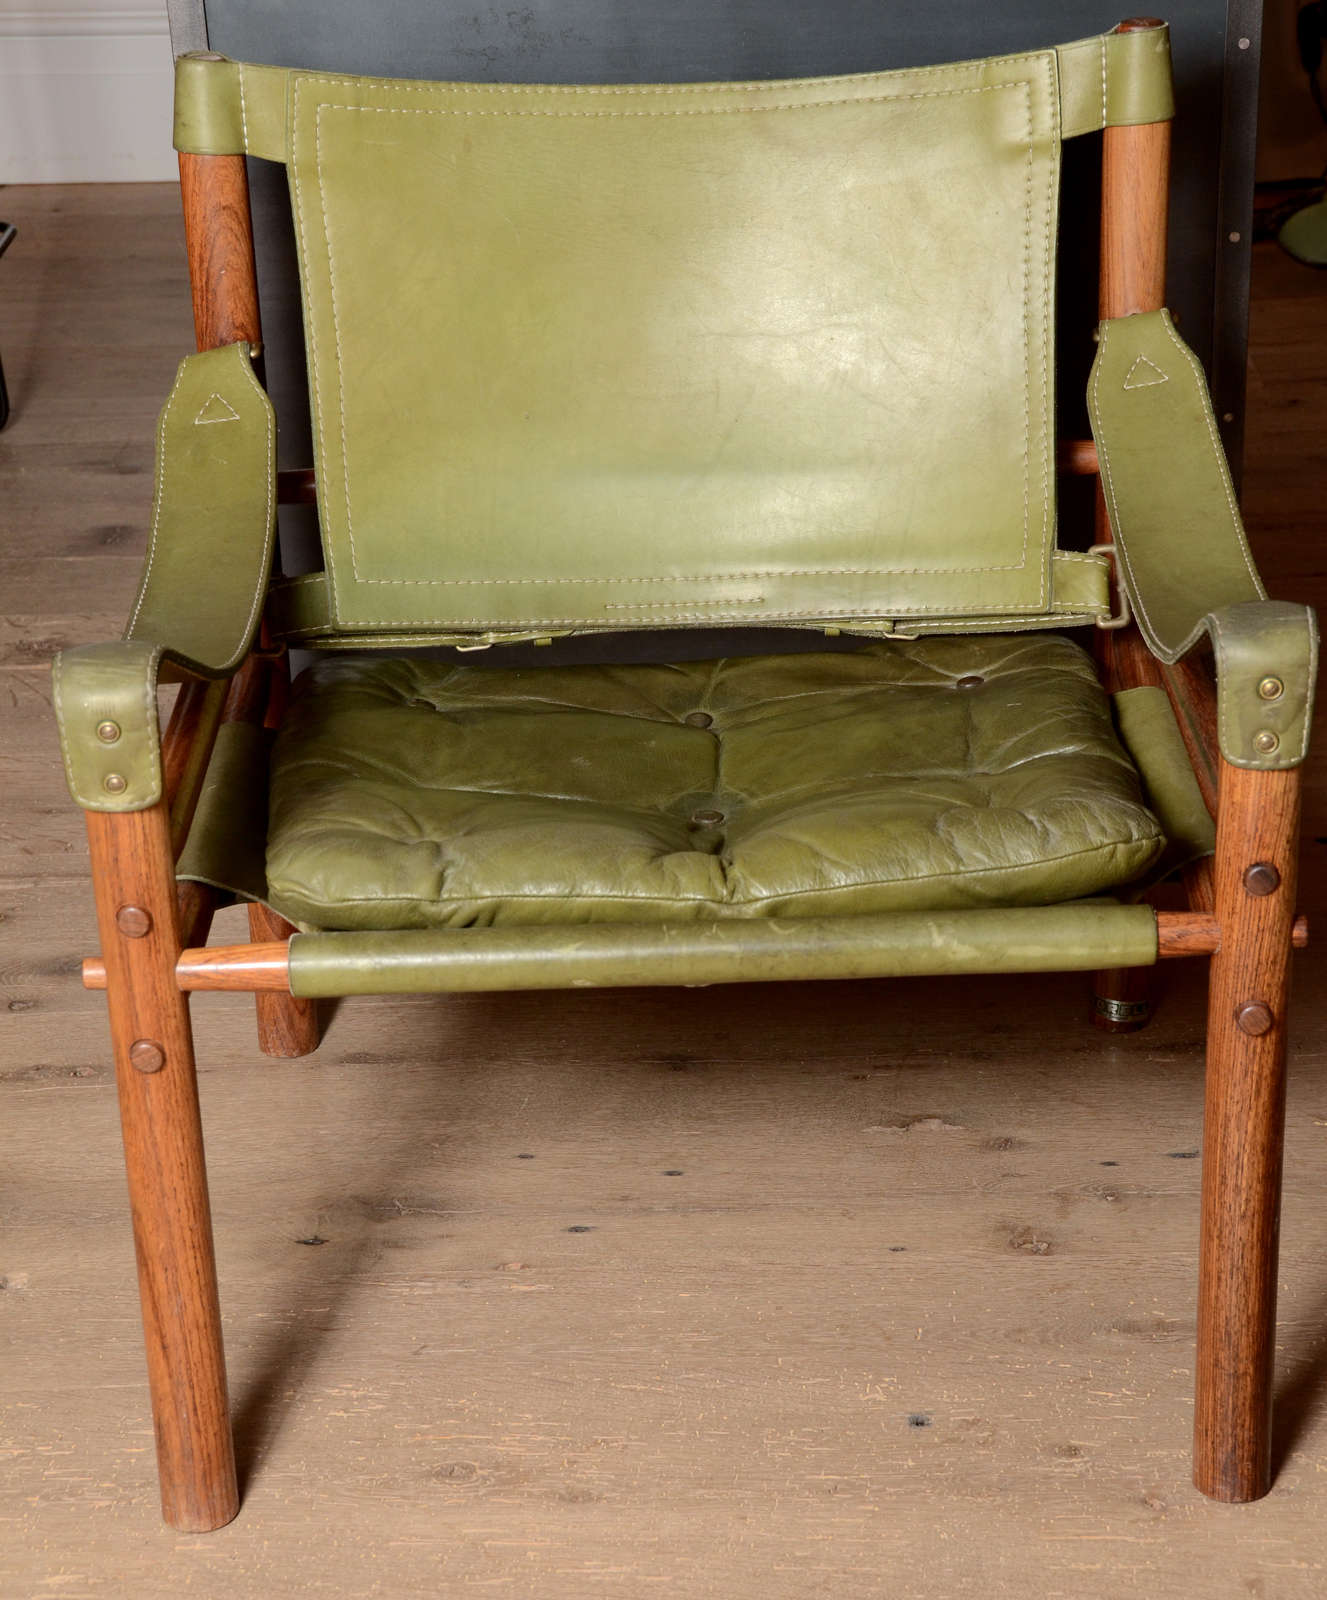 Stunning pair of Mid-Century Arne Norell Safari chairs in light olive green original leather